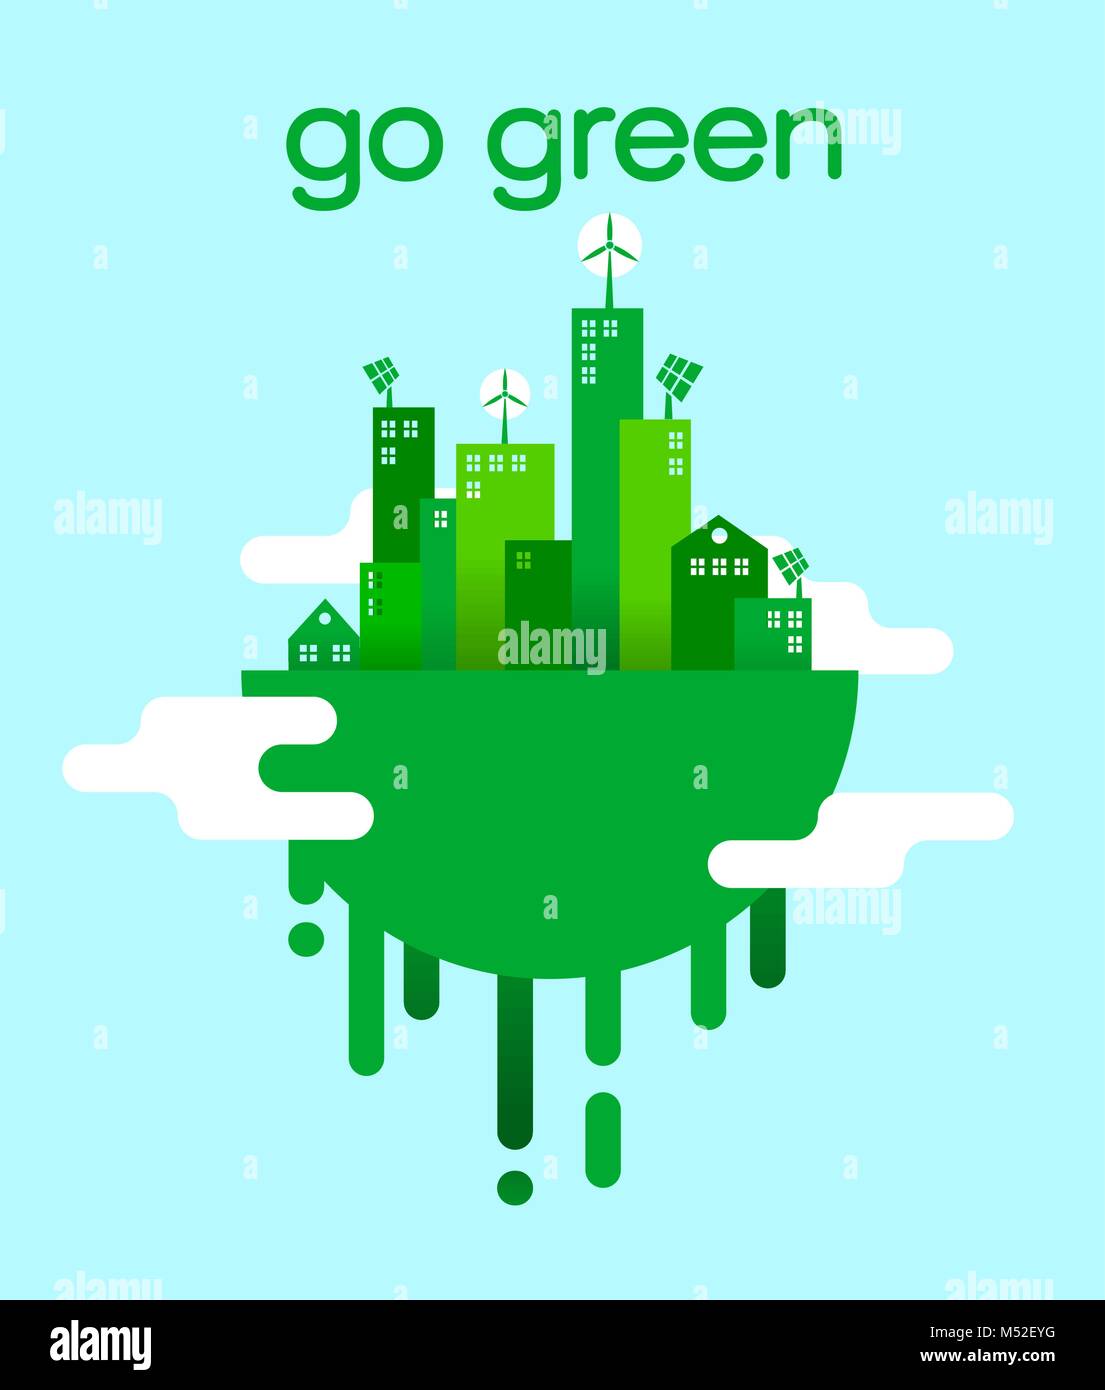 Go green flat concept illustration with eco friendly city for environment care and sustainable lifestyle. EPS10 vector. Stock Vector